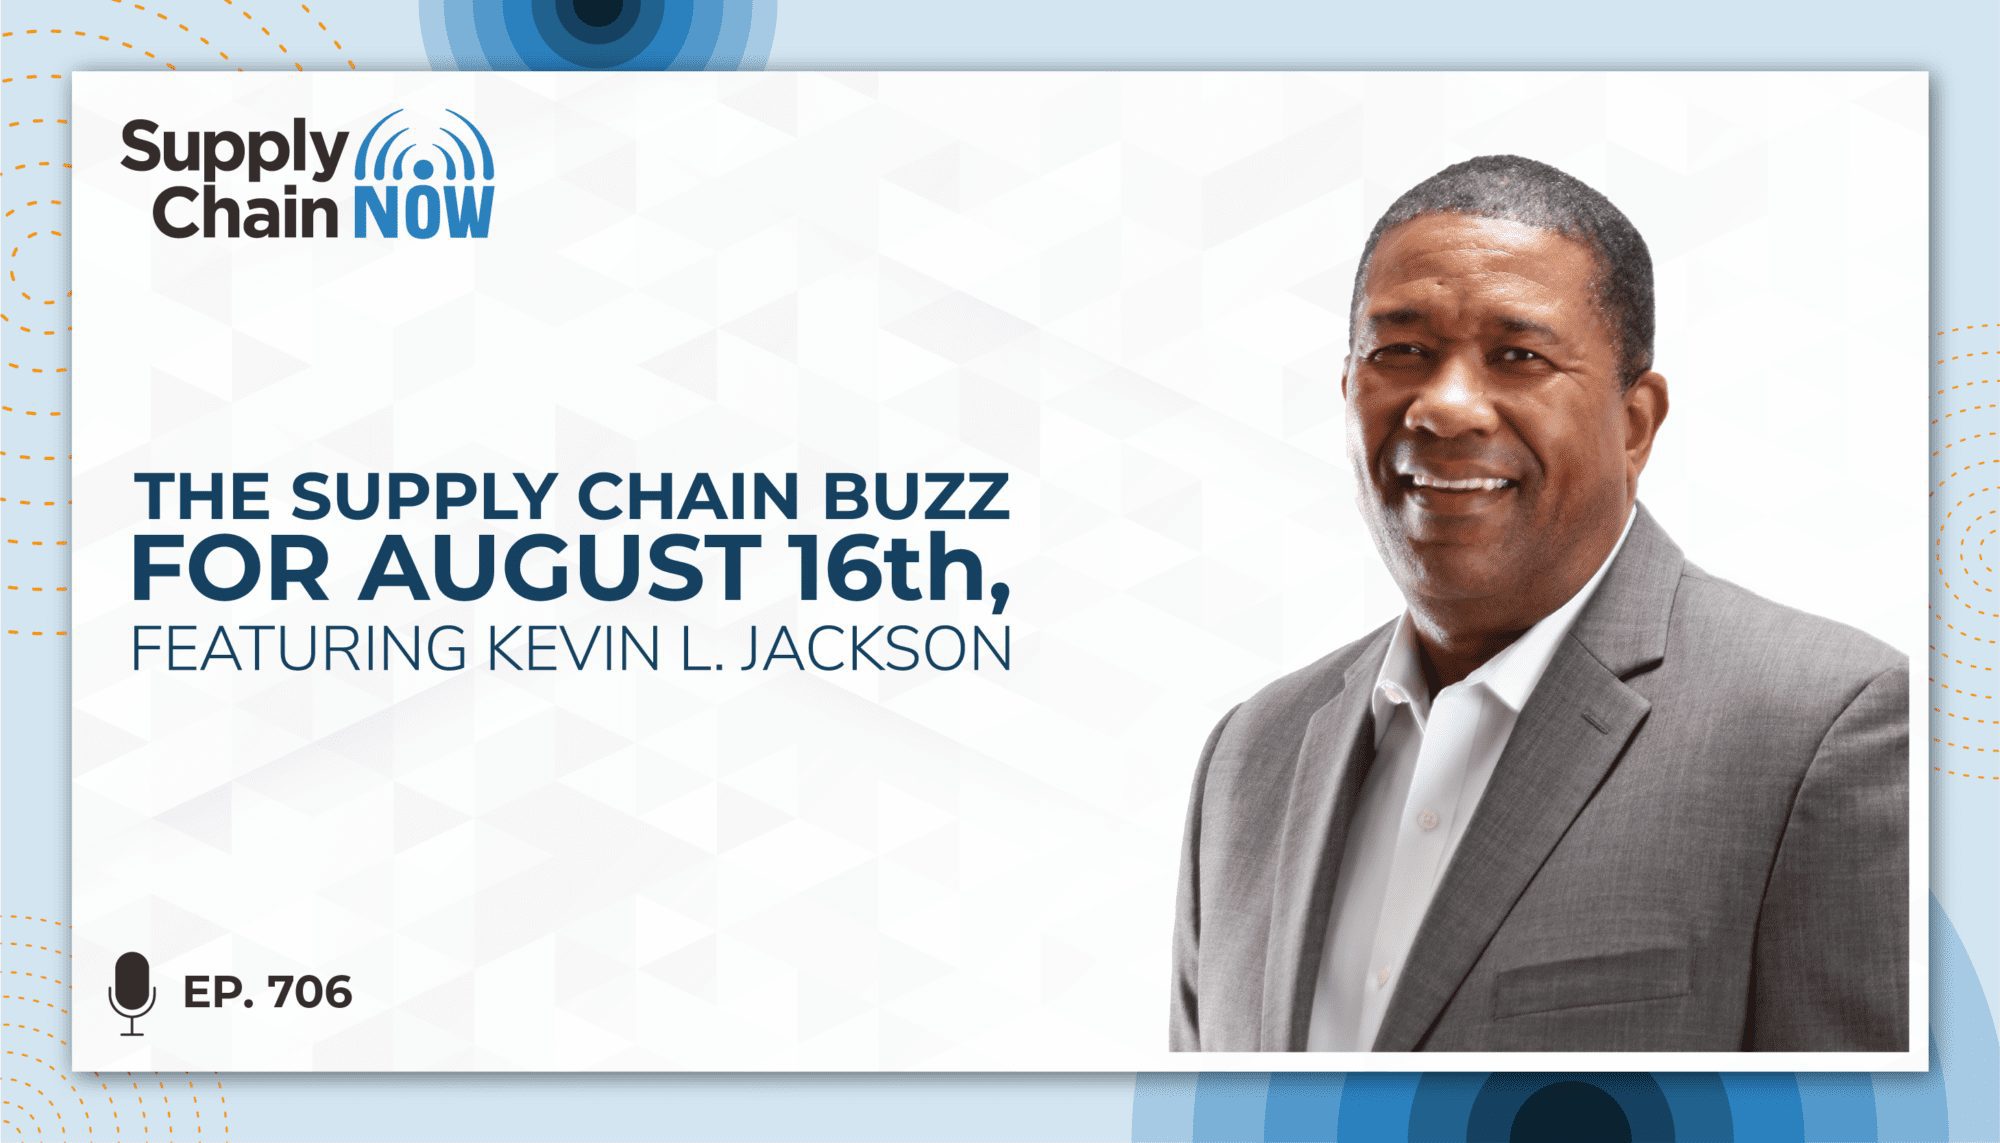 Kevin L Jackson in The Supply Chain Buzz for August 16th